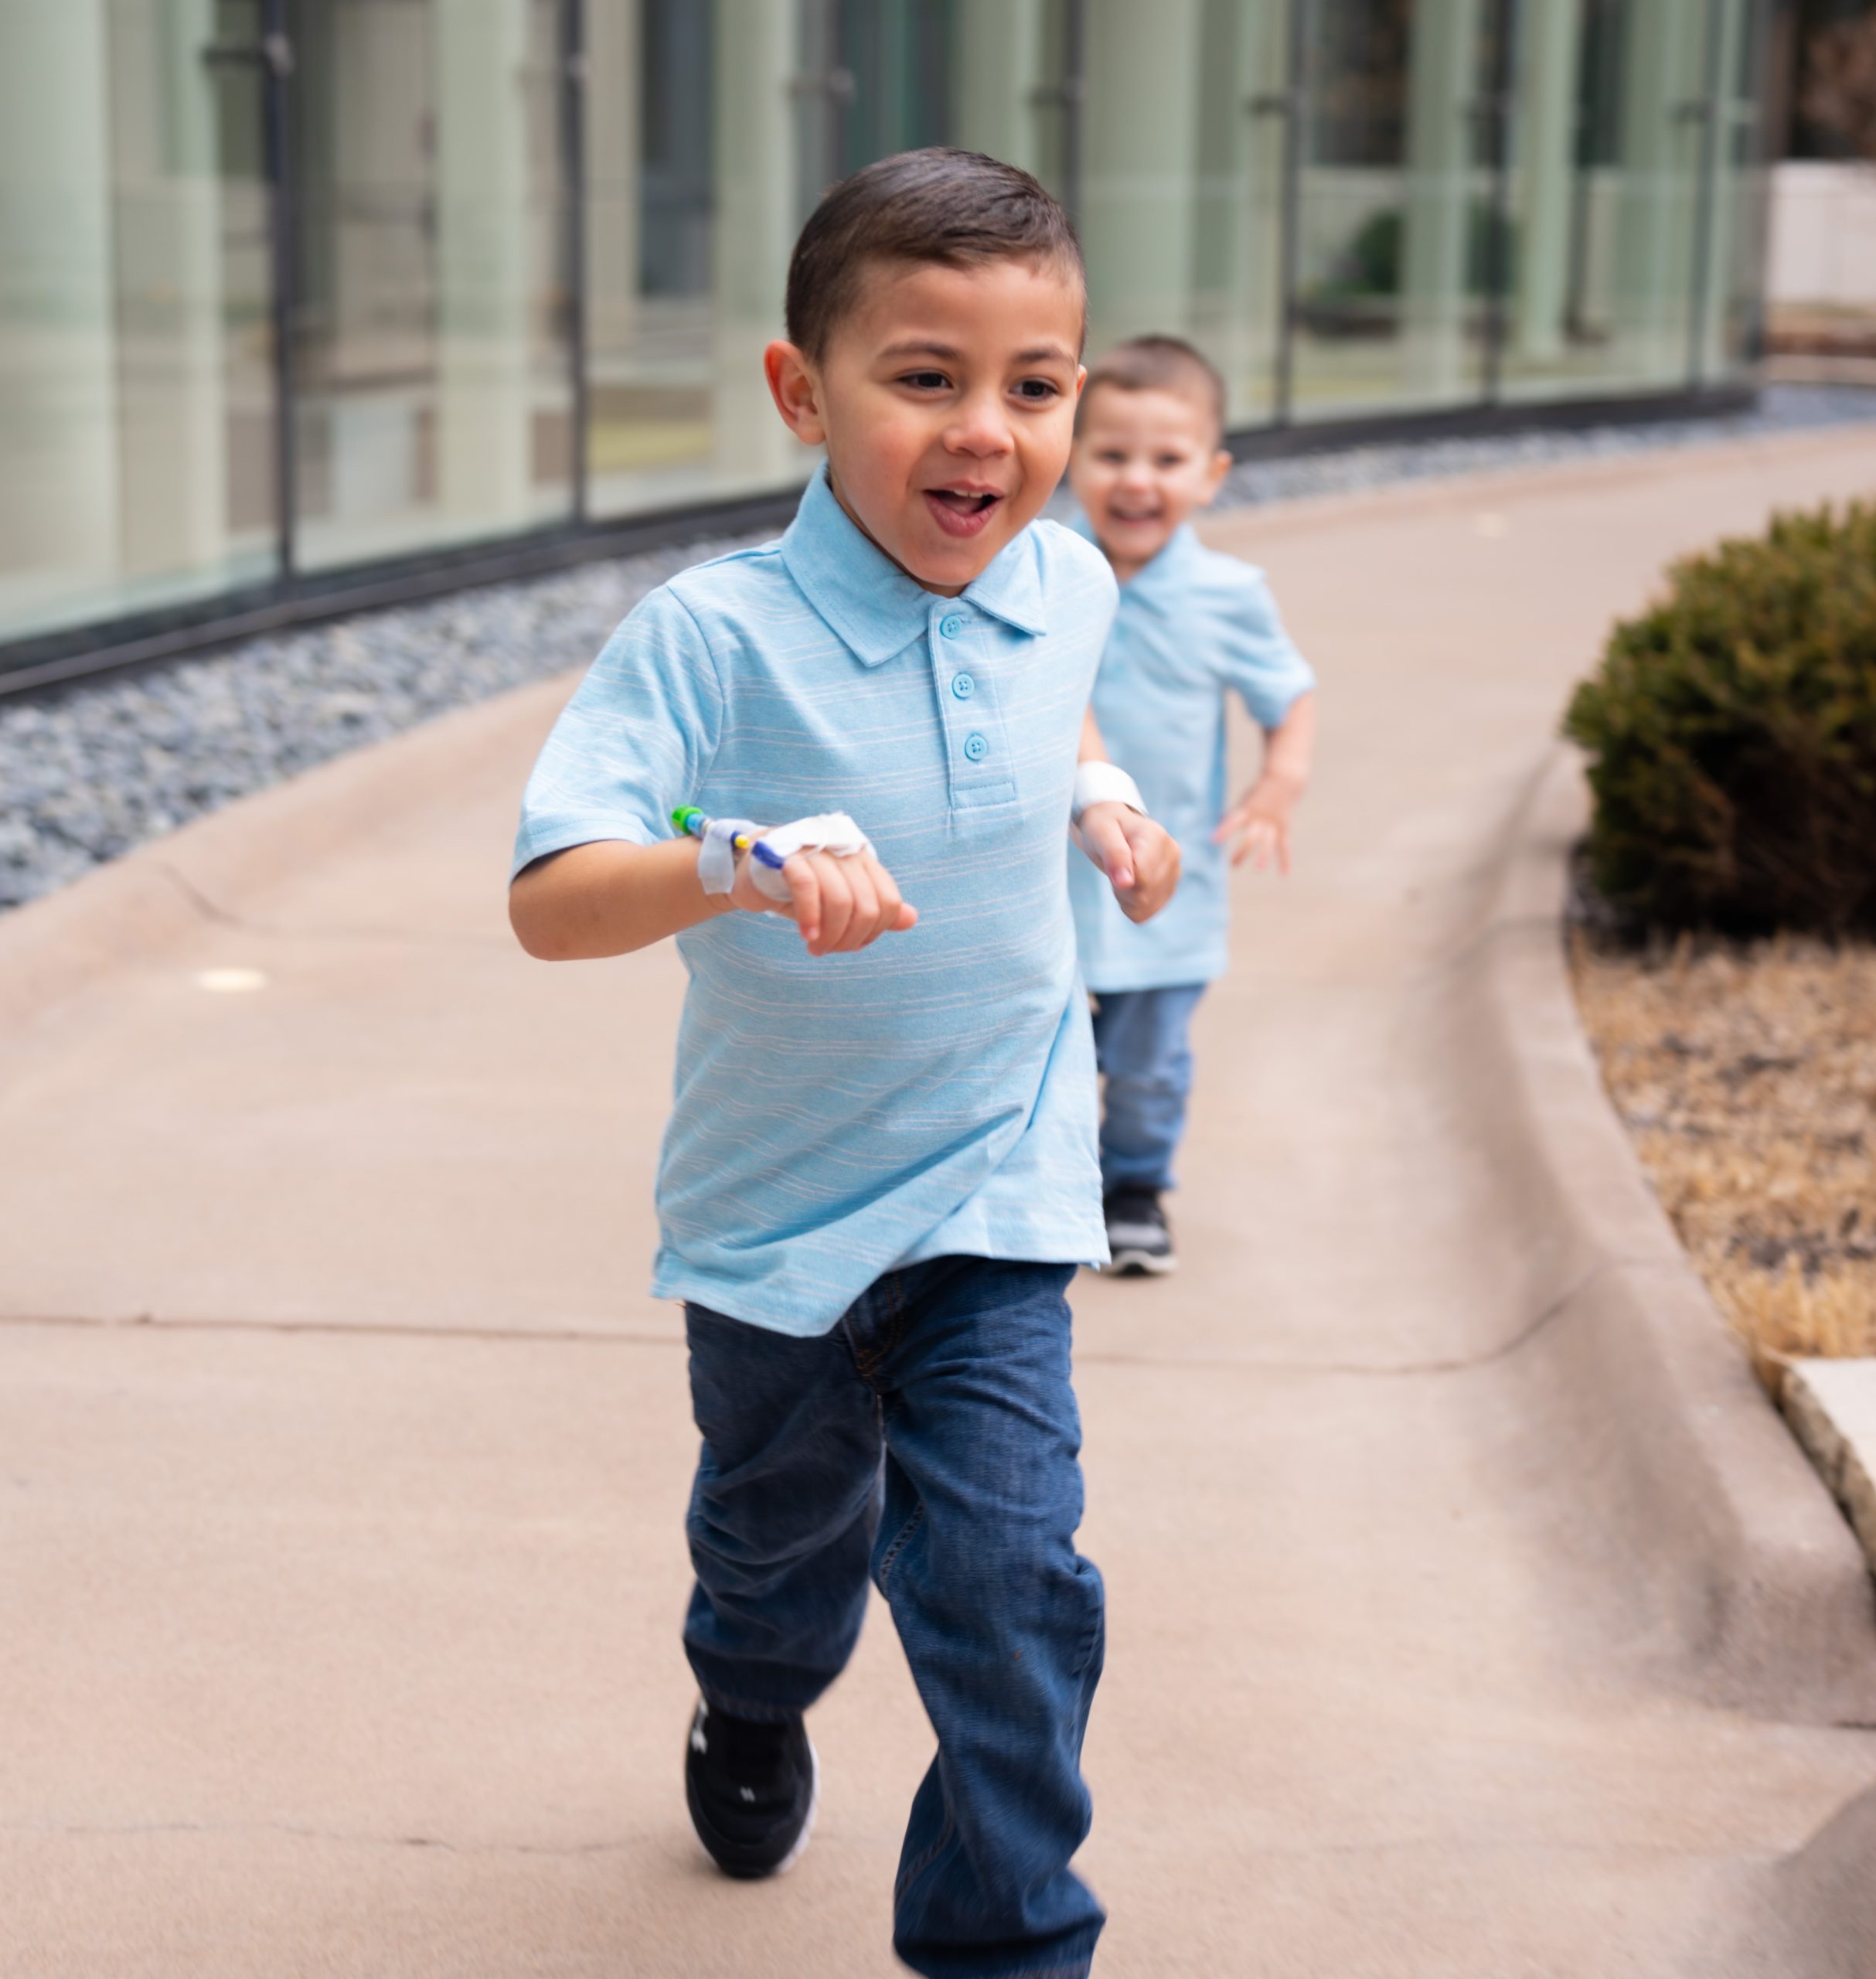 Ethan and his brother, Kayden, run on the sidewalk during their photo session